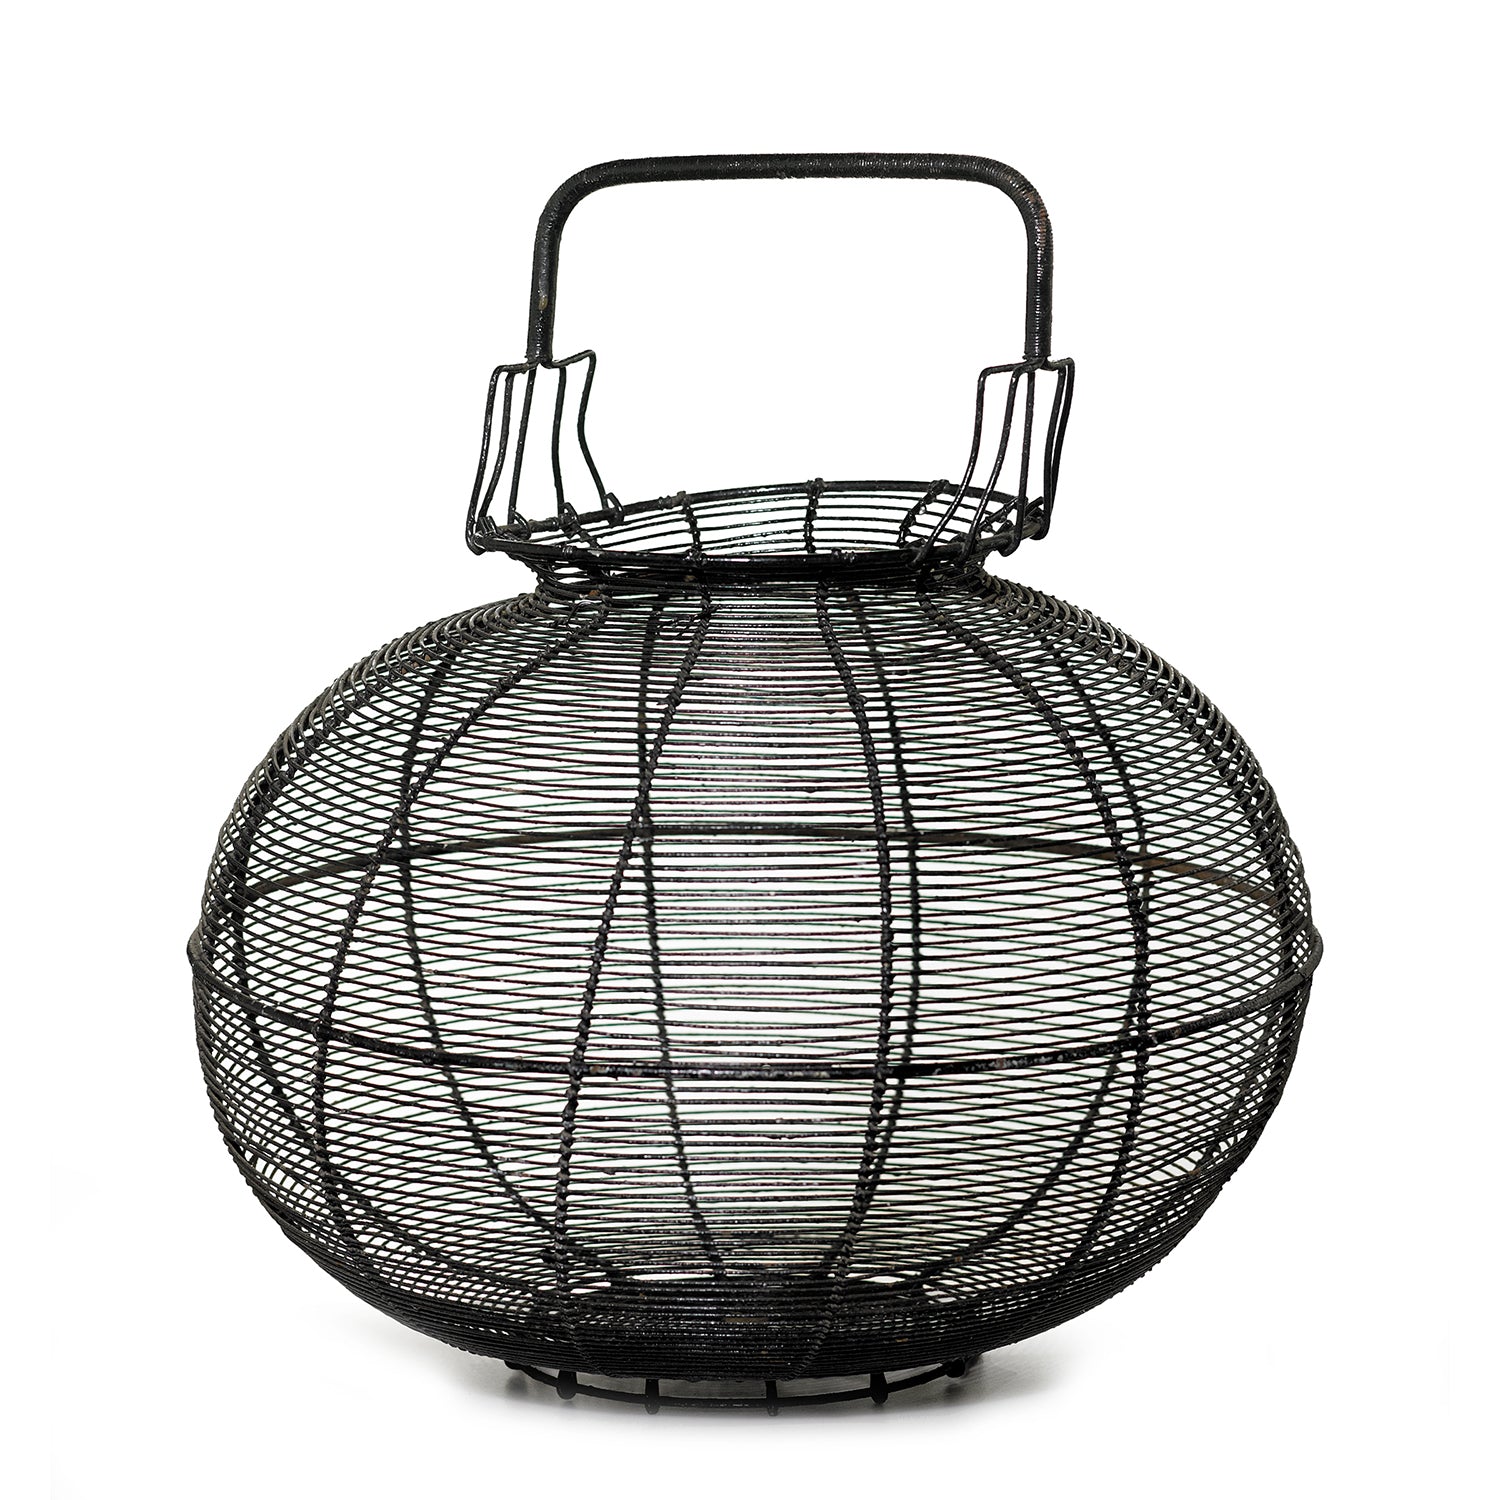 SOLD An impressive black painted metal provincial egg collecting basket, French Circa 1900